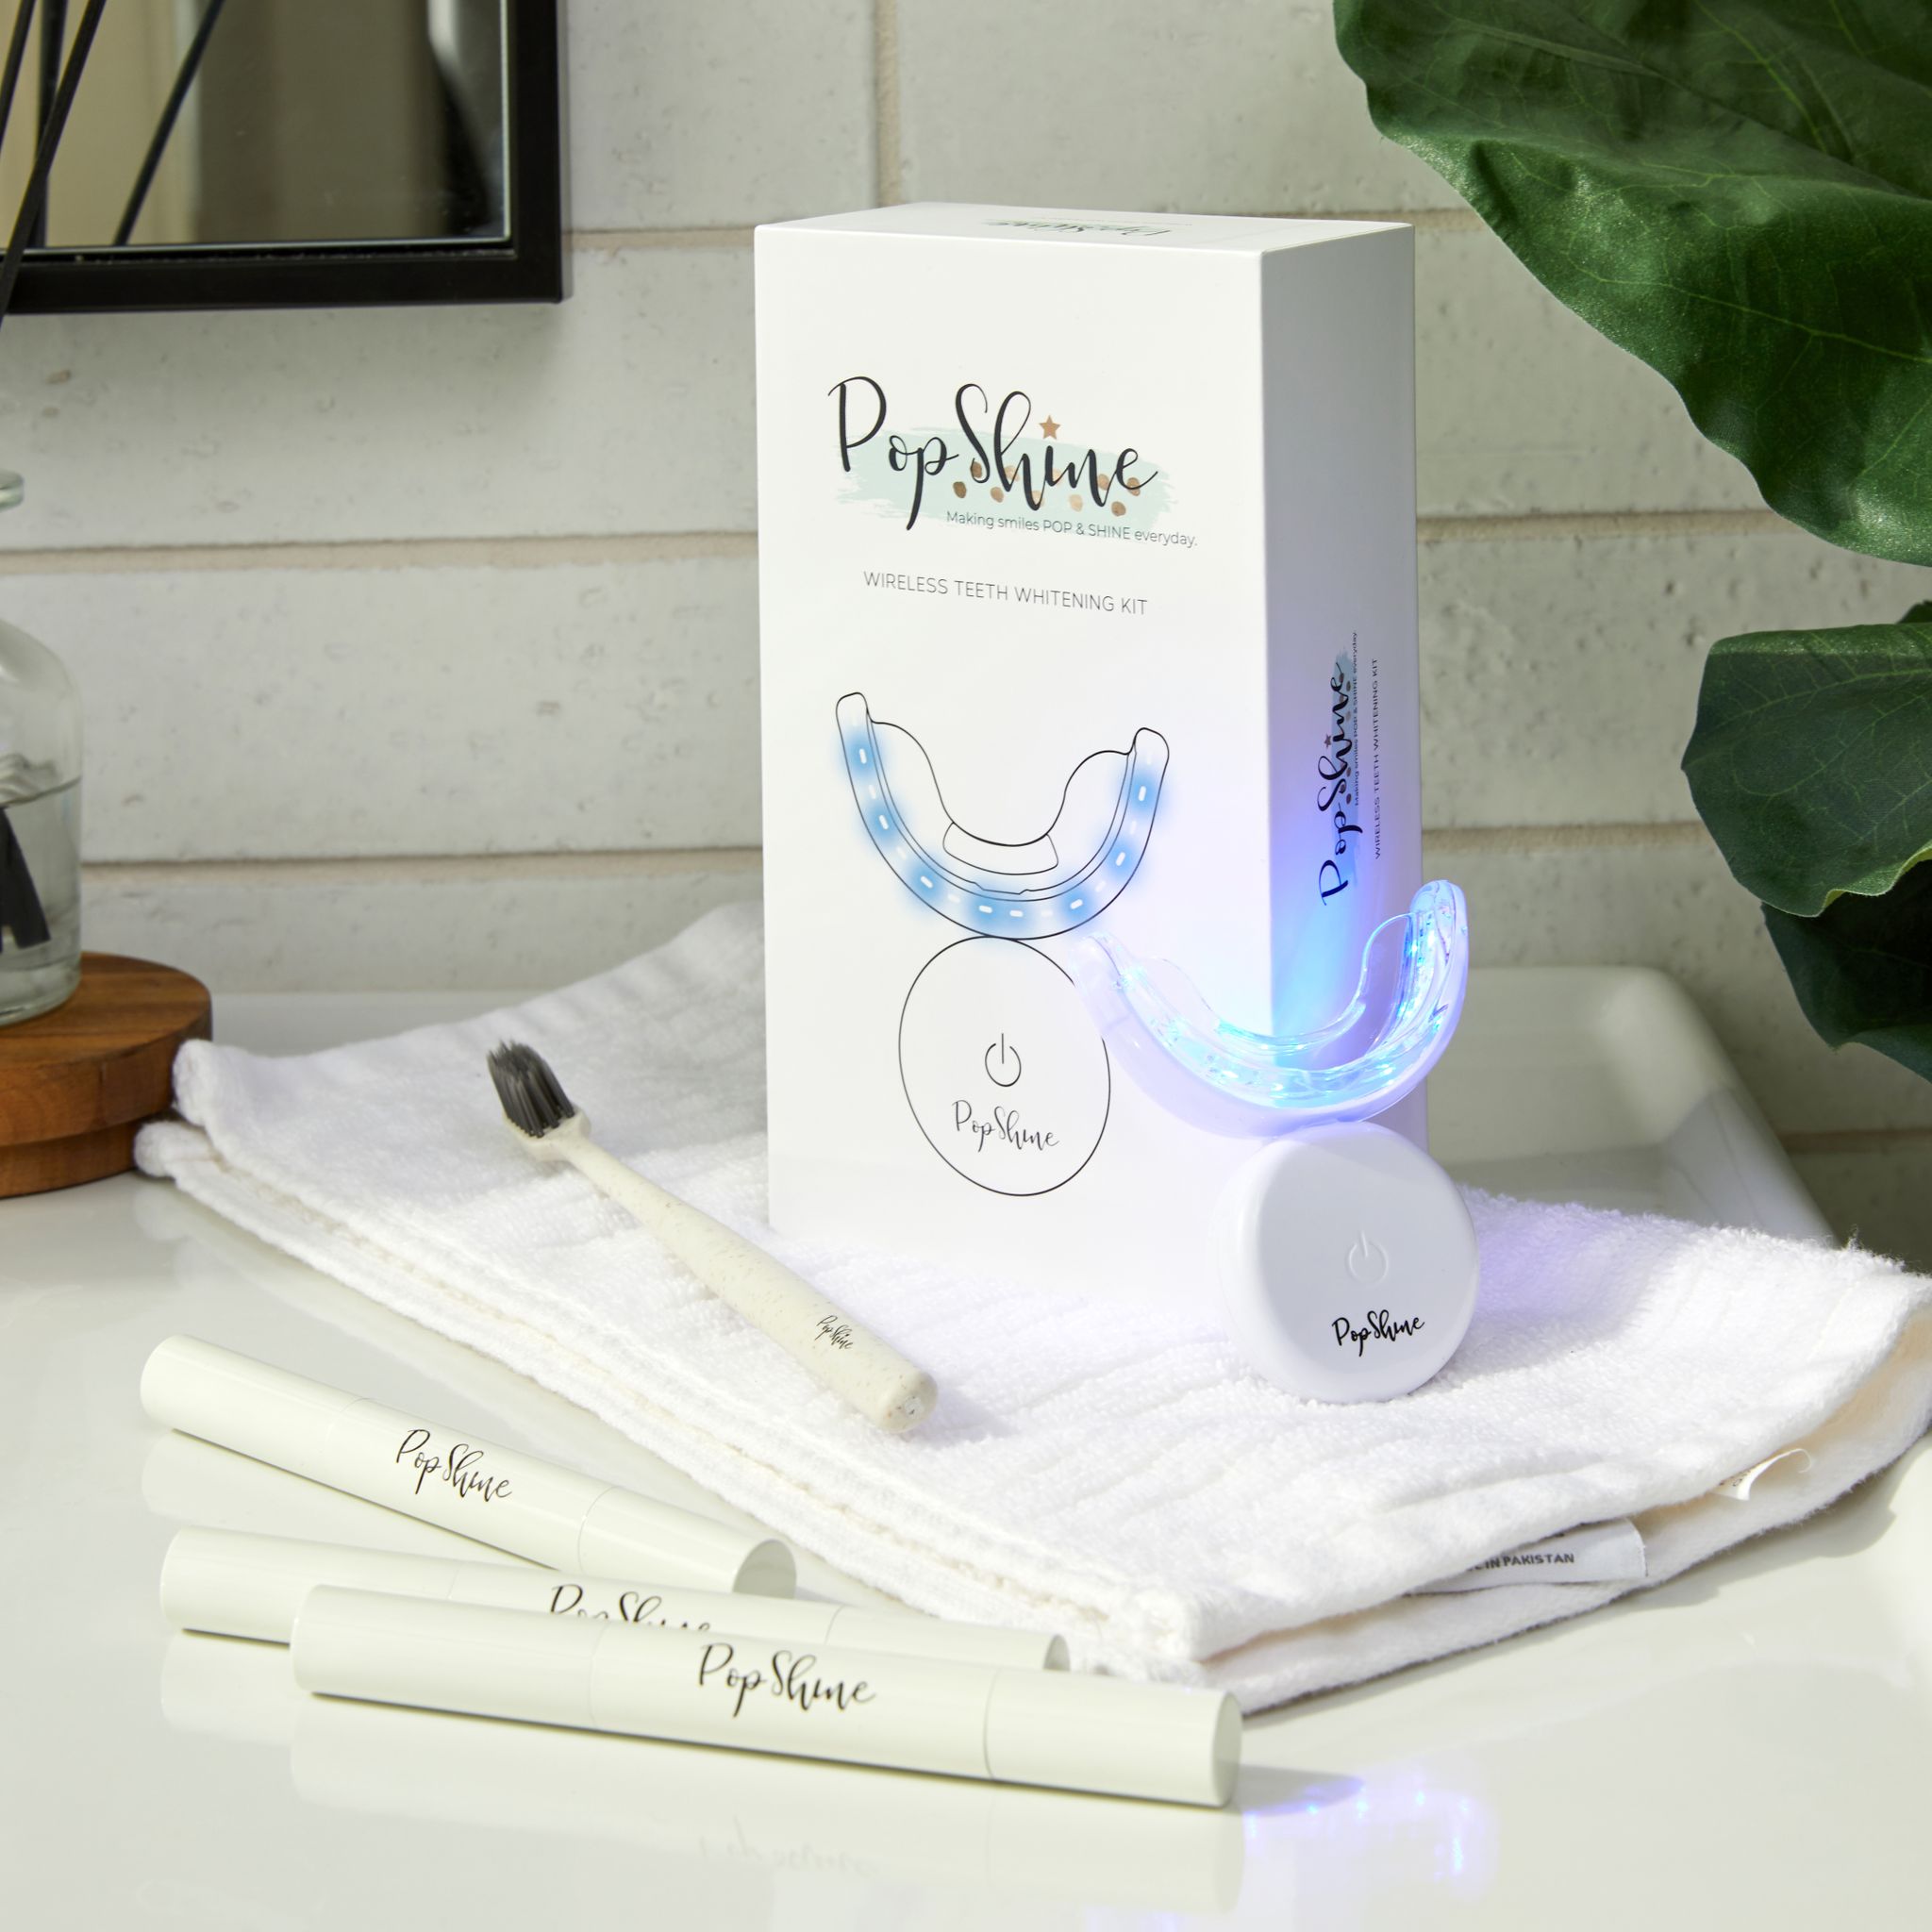 Newly launched tooth whitening technology, PopShine, ensures safe, affordable results